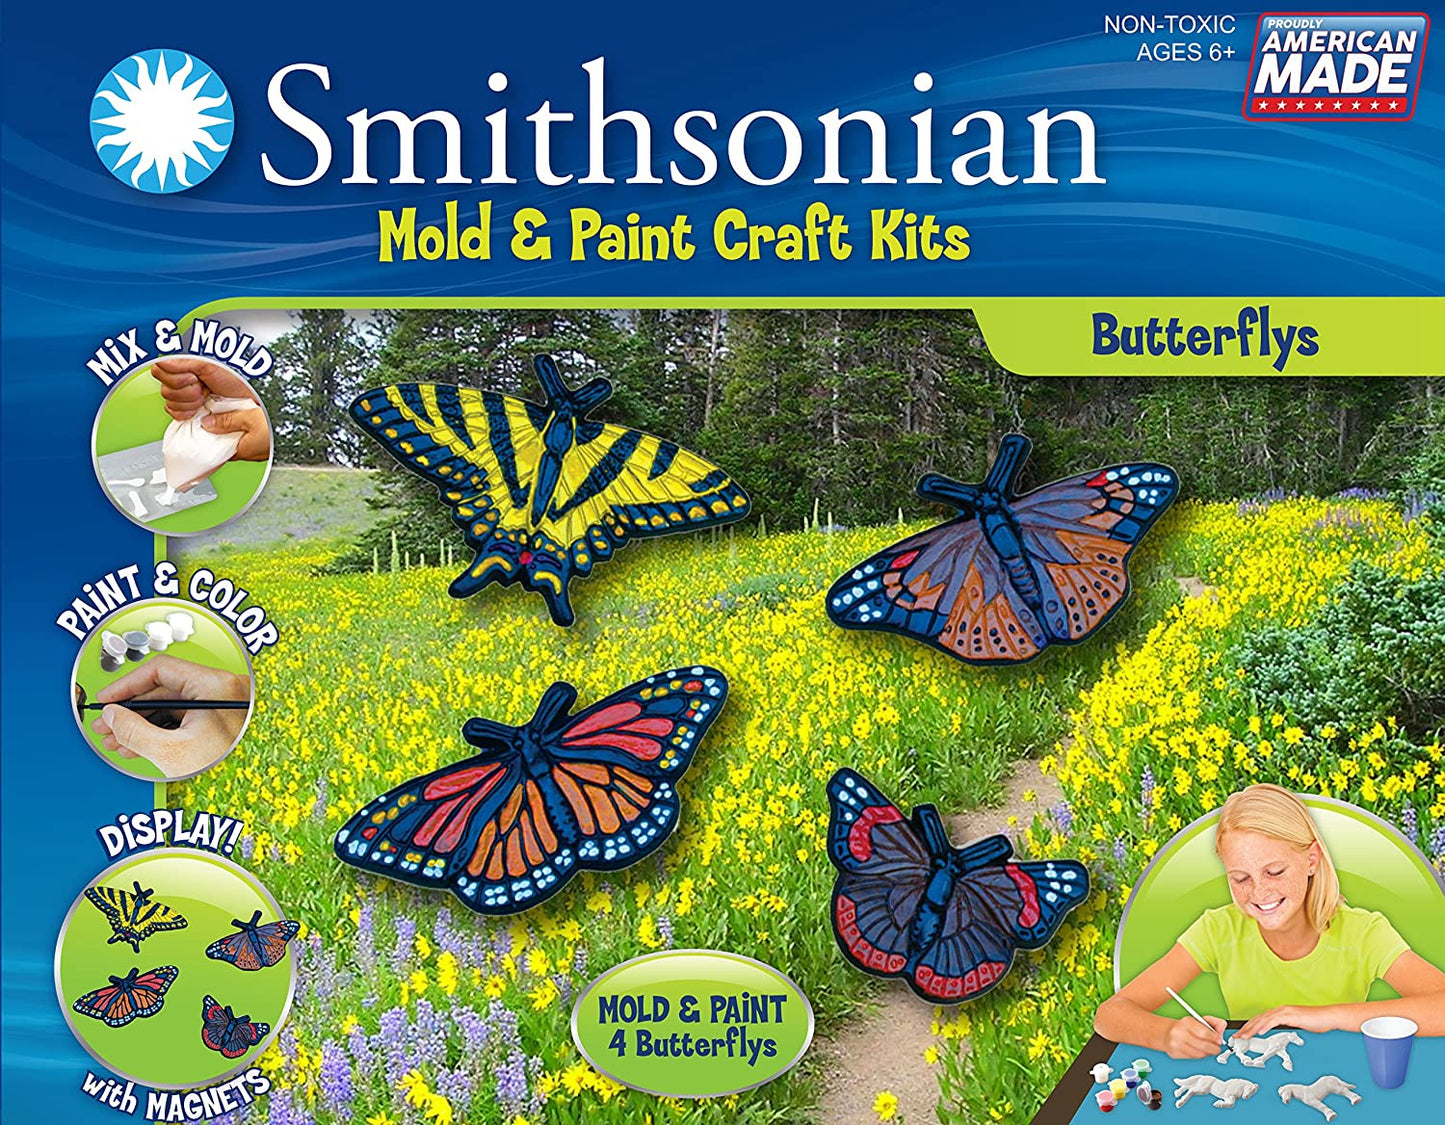 Smithsonian Mold and Paint Kits